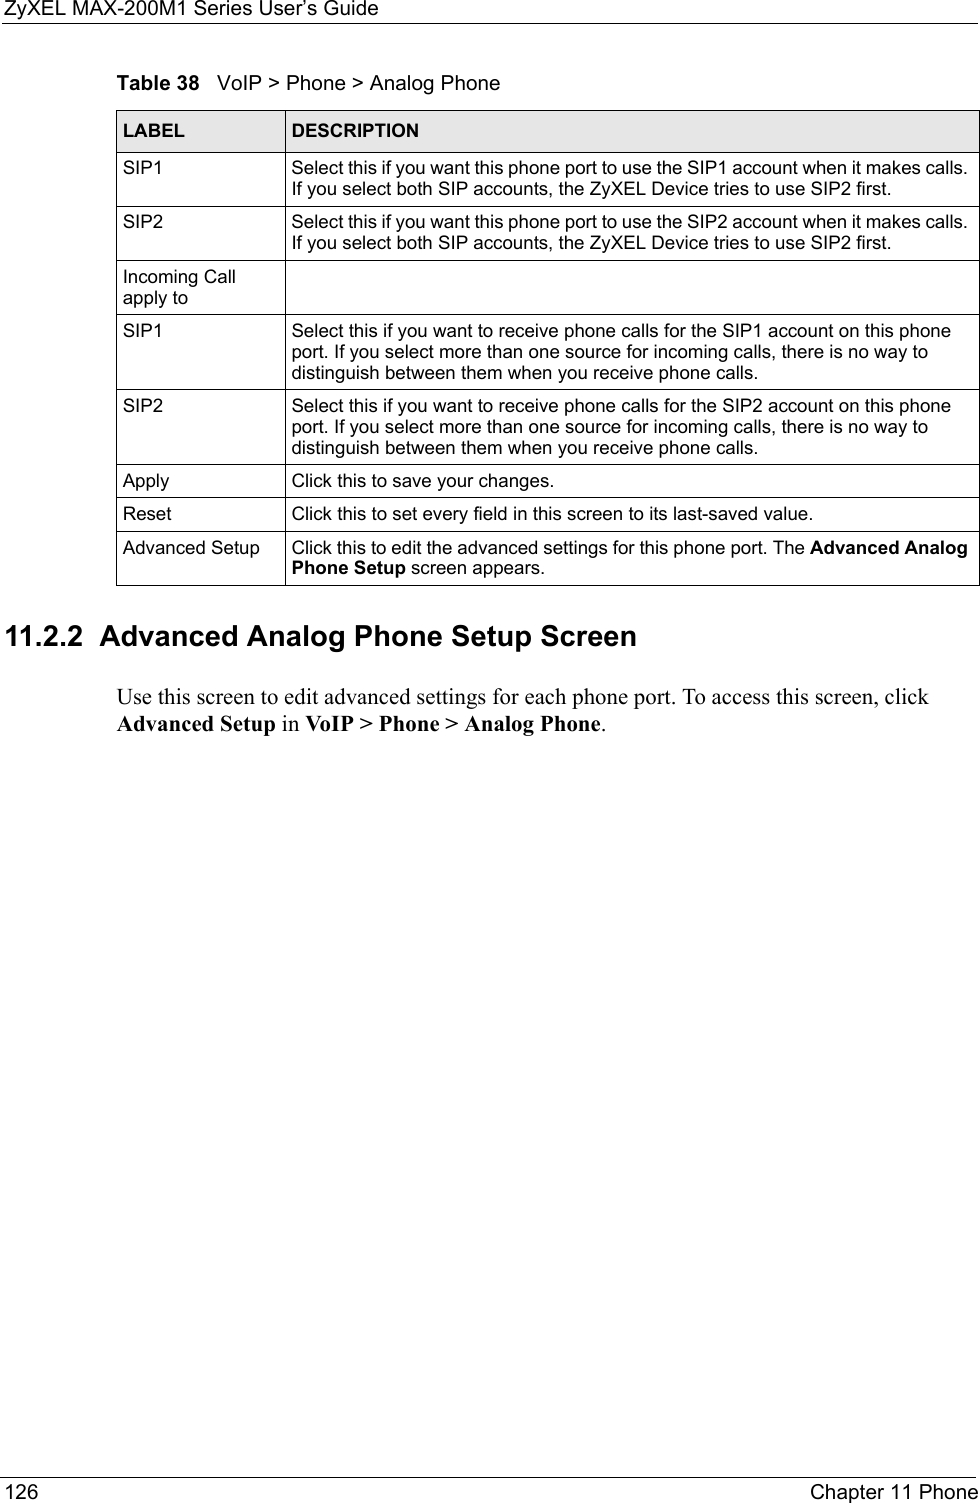 ZyXEL MAX-200M1 Series User’s Guide126 Chapter 11 Phone11.2.2  Advanced Analog Phone Setup ScreenUse this screen to edit advanced settings for each phone port. To access this screen, click Advanced Setup in VoIP &gt; Phone &gt; Analog Phone.SIP1 Select this if you want this phone port to use the SIP1 account when it makes calls. If you select both SIP accounts, the ZyXEL Device tries to use SIP2 first.SIP2 Select this if you want this phone port to use the SIP2 account when it makes calls. If you select both SIP accounts, the ZyXEL Device tries to use SIP2 first.Incoming Call apply toSIP1 Select this if you want to receive phone calls for the SIP1 account on this phone port. If you select more than one source for incoming calls, there is no way to distinguish between them when you receive phone calls.SIP2 Select this if you want to receive phone calls for the SIP2 account on this phone port. If you select more than one source for incoming calls, there is no way to distinguish between them when you receive phone calls.Apply Click this to save your changes.Reset Click this to set every field in this screen to its last-saved value.Advanced Setup Click this to edit the advanced settings for this phone port. The Advanced Analog Phone Setup screen appears.Table 38   VoIP &gt; Phone &gt; Analog PhoneLABEL DESCRIPTION